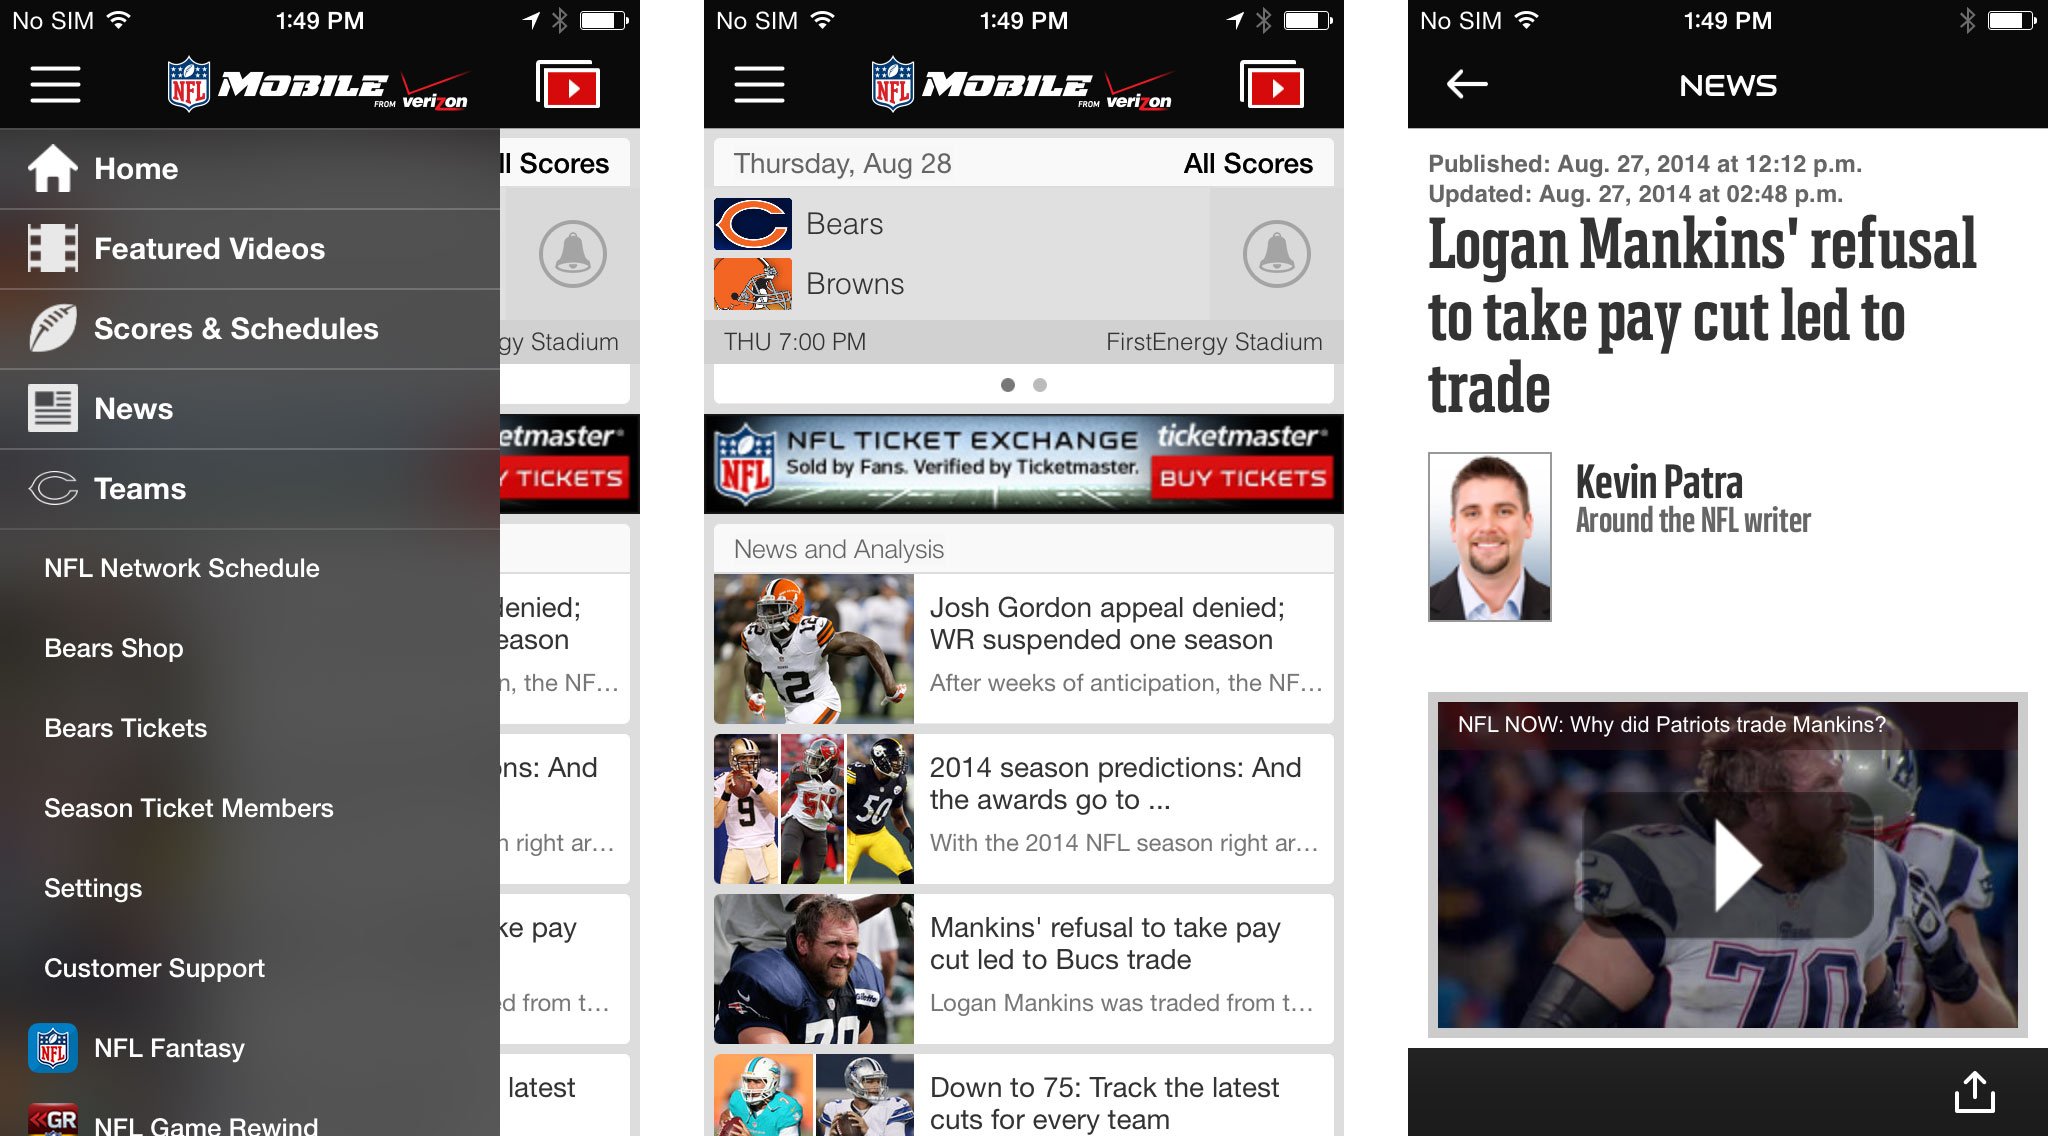 Best NFL apps for iPhone: NFL Mobile 